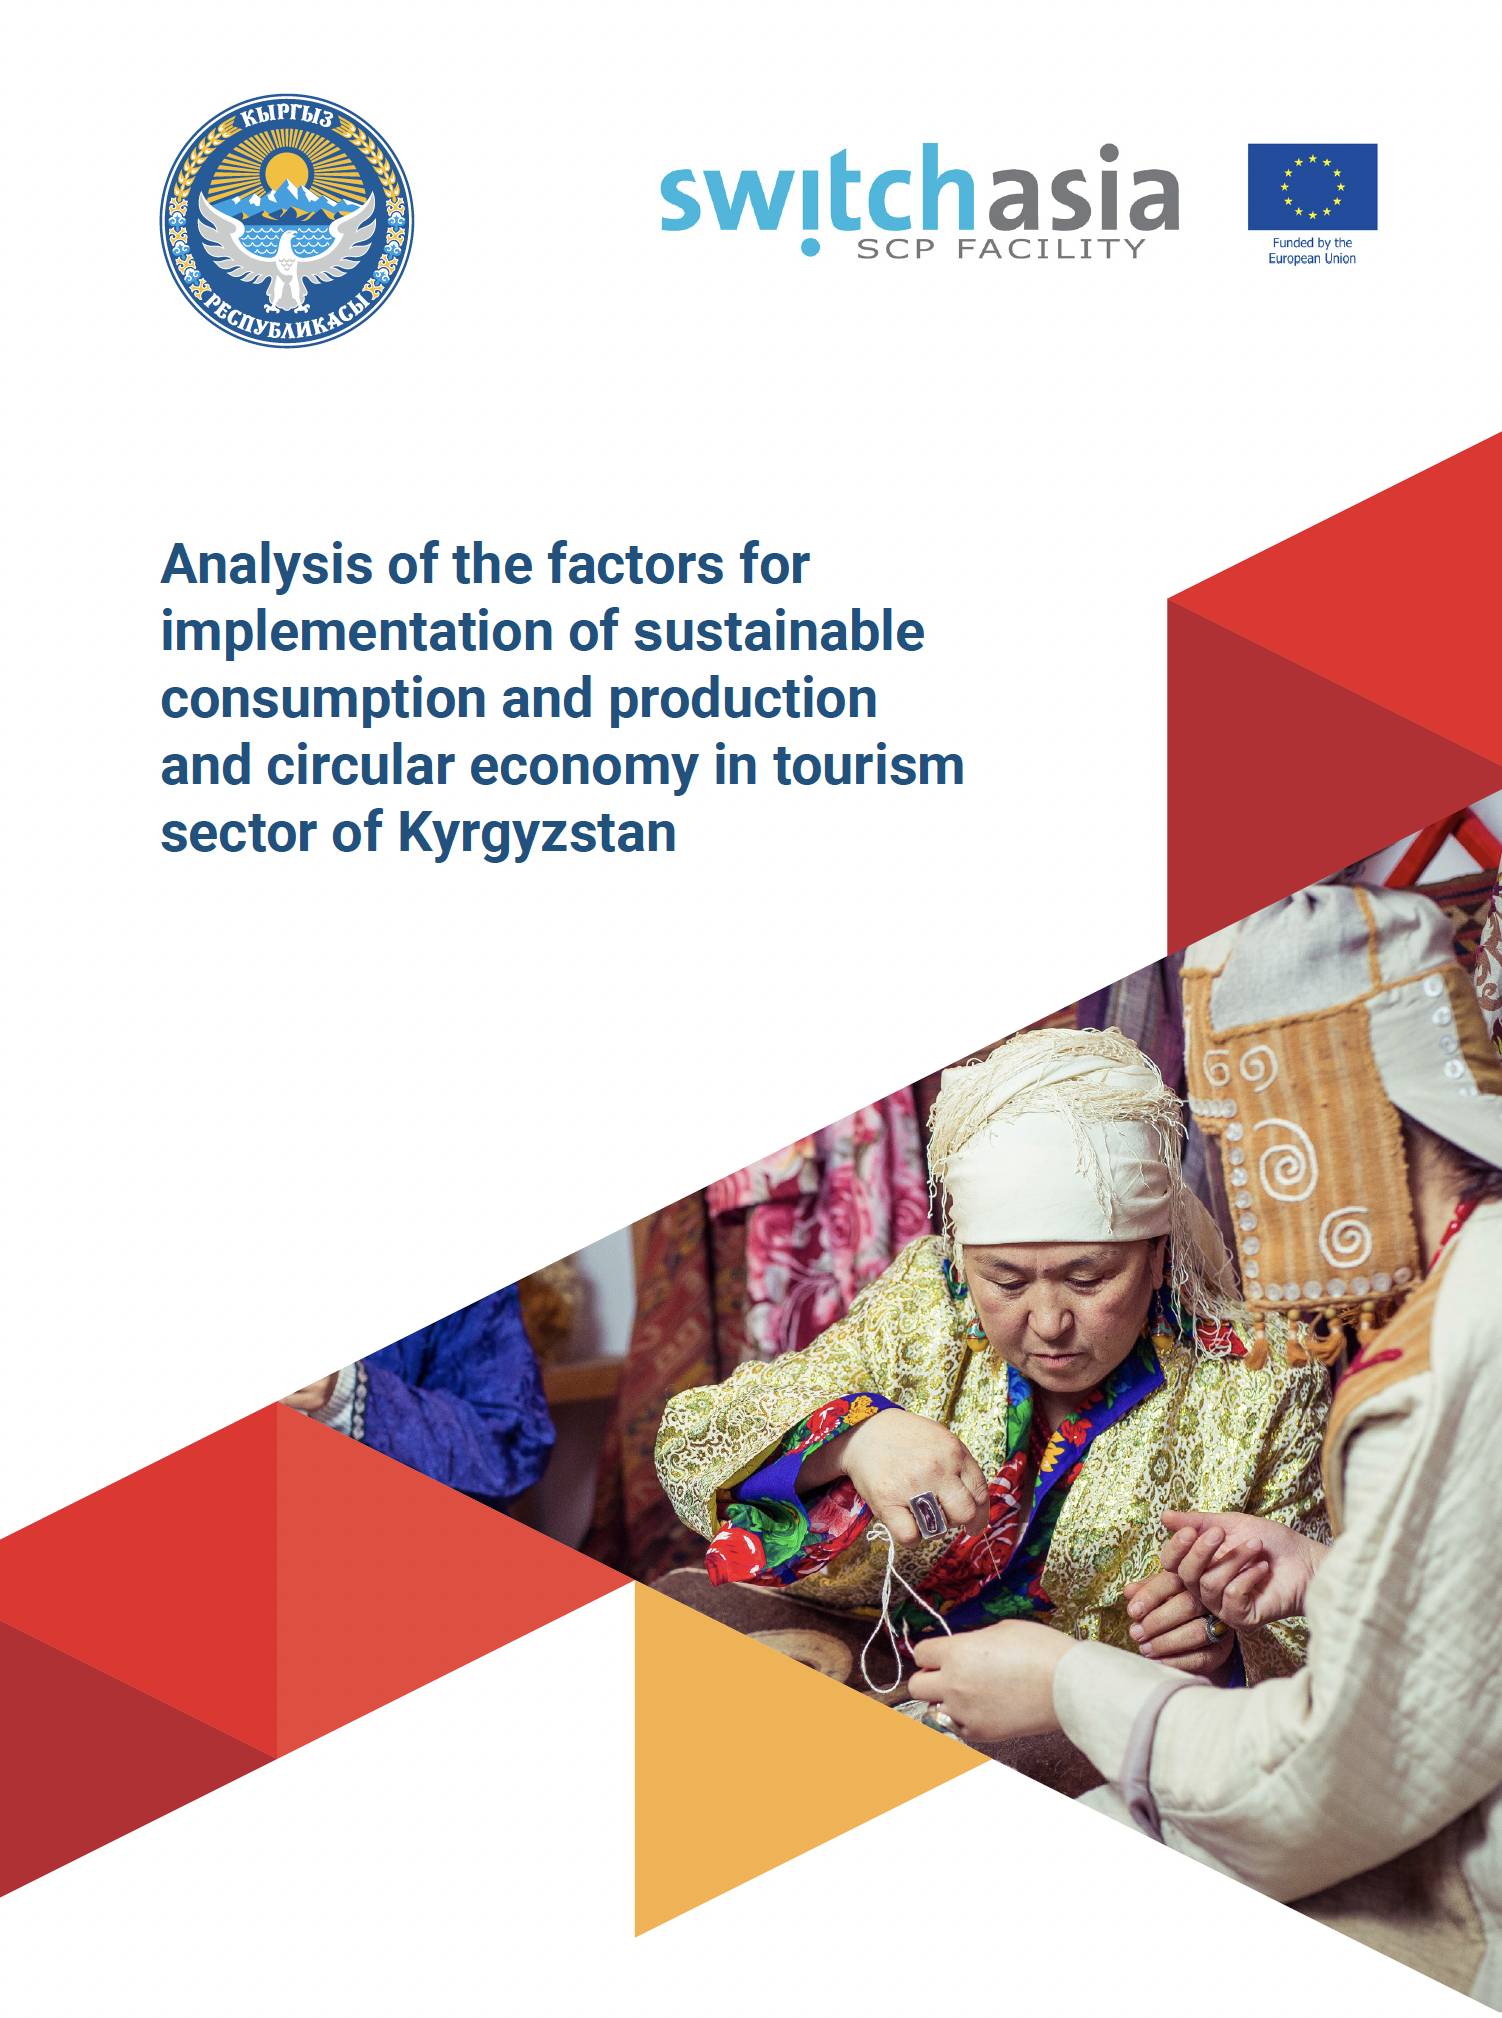 Analysis of the factors for implementation of sustainable consumption and production and circular economy in tourism sector of Kyrgyzstan